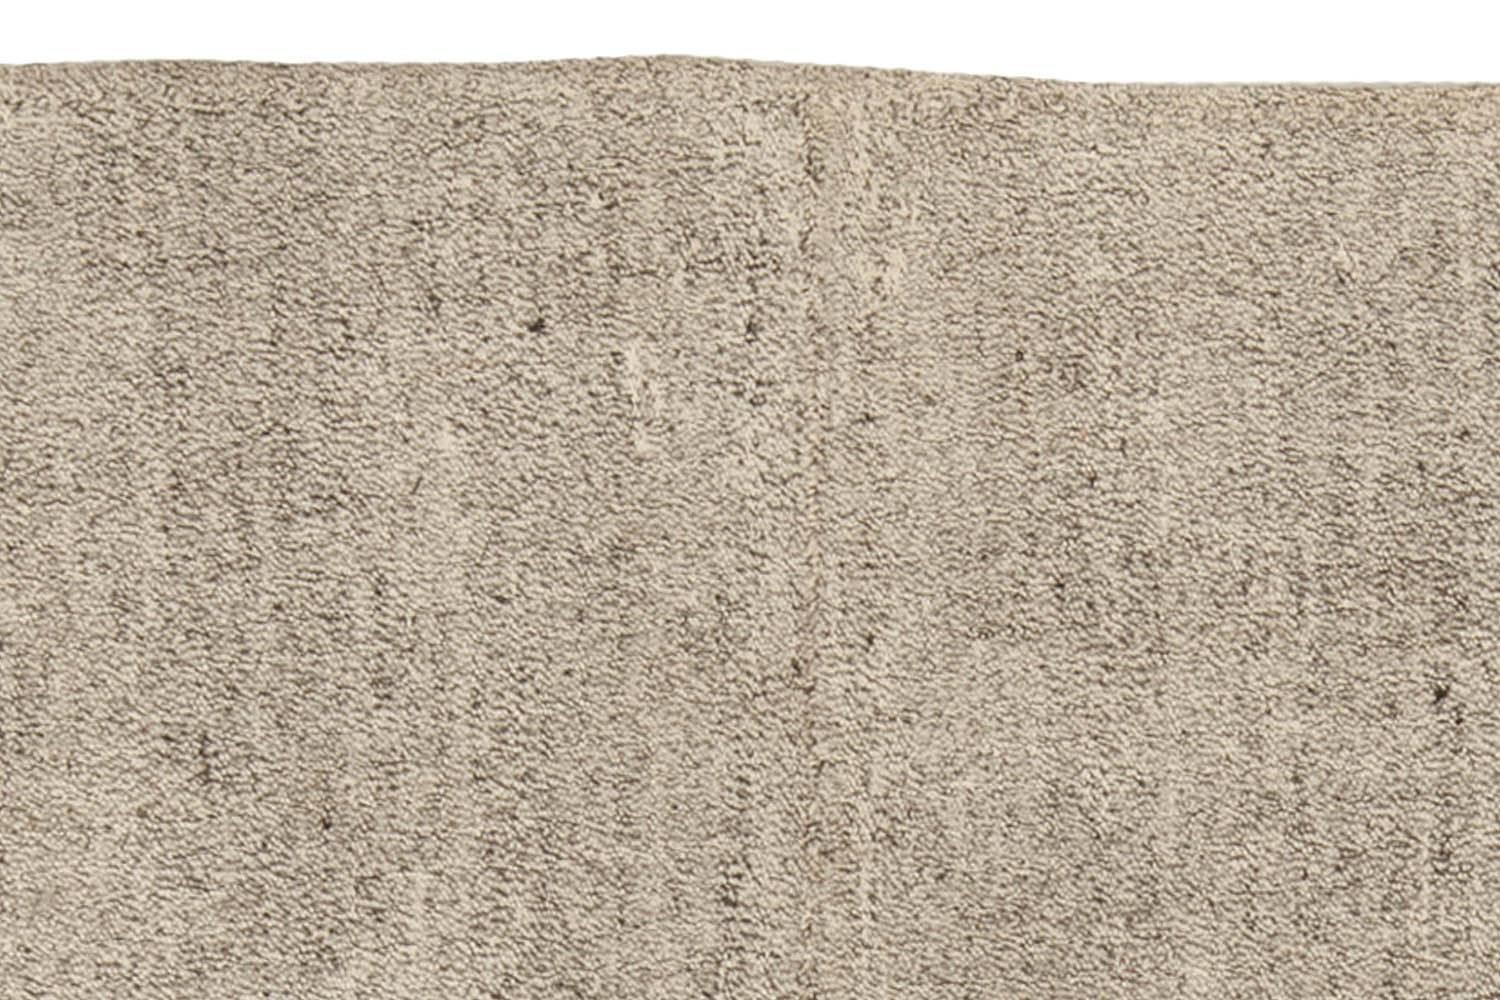 Modern Persian Beige and Grey Handmade Wool Kilim Rug by Dorie Leslie Blau In New Condition For Sale In New York, NY